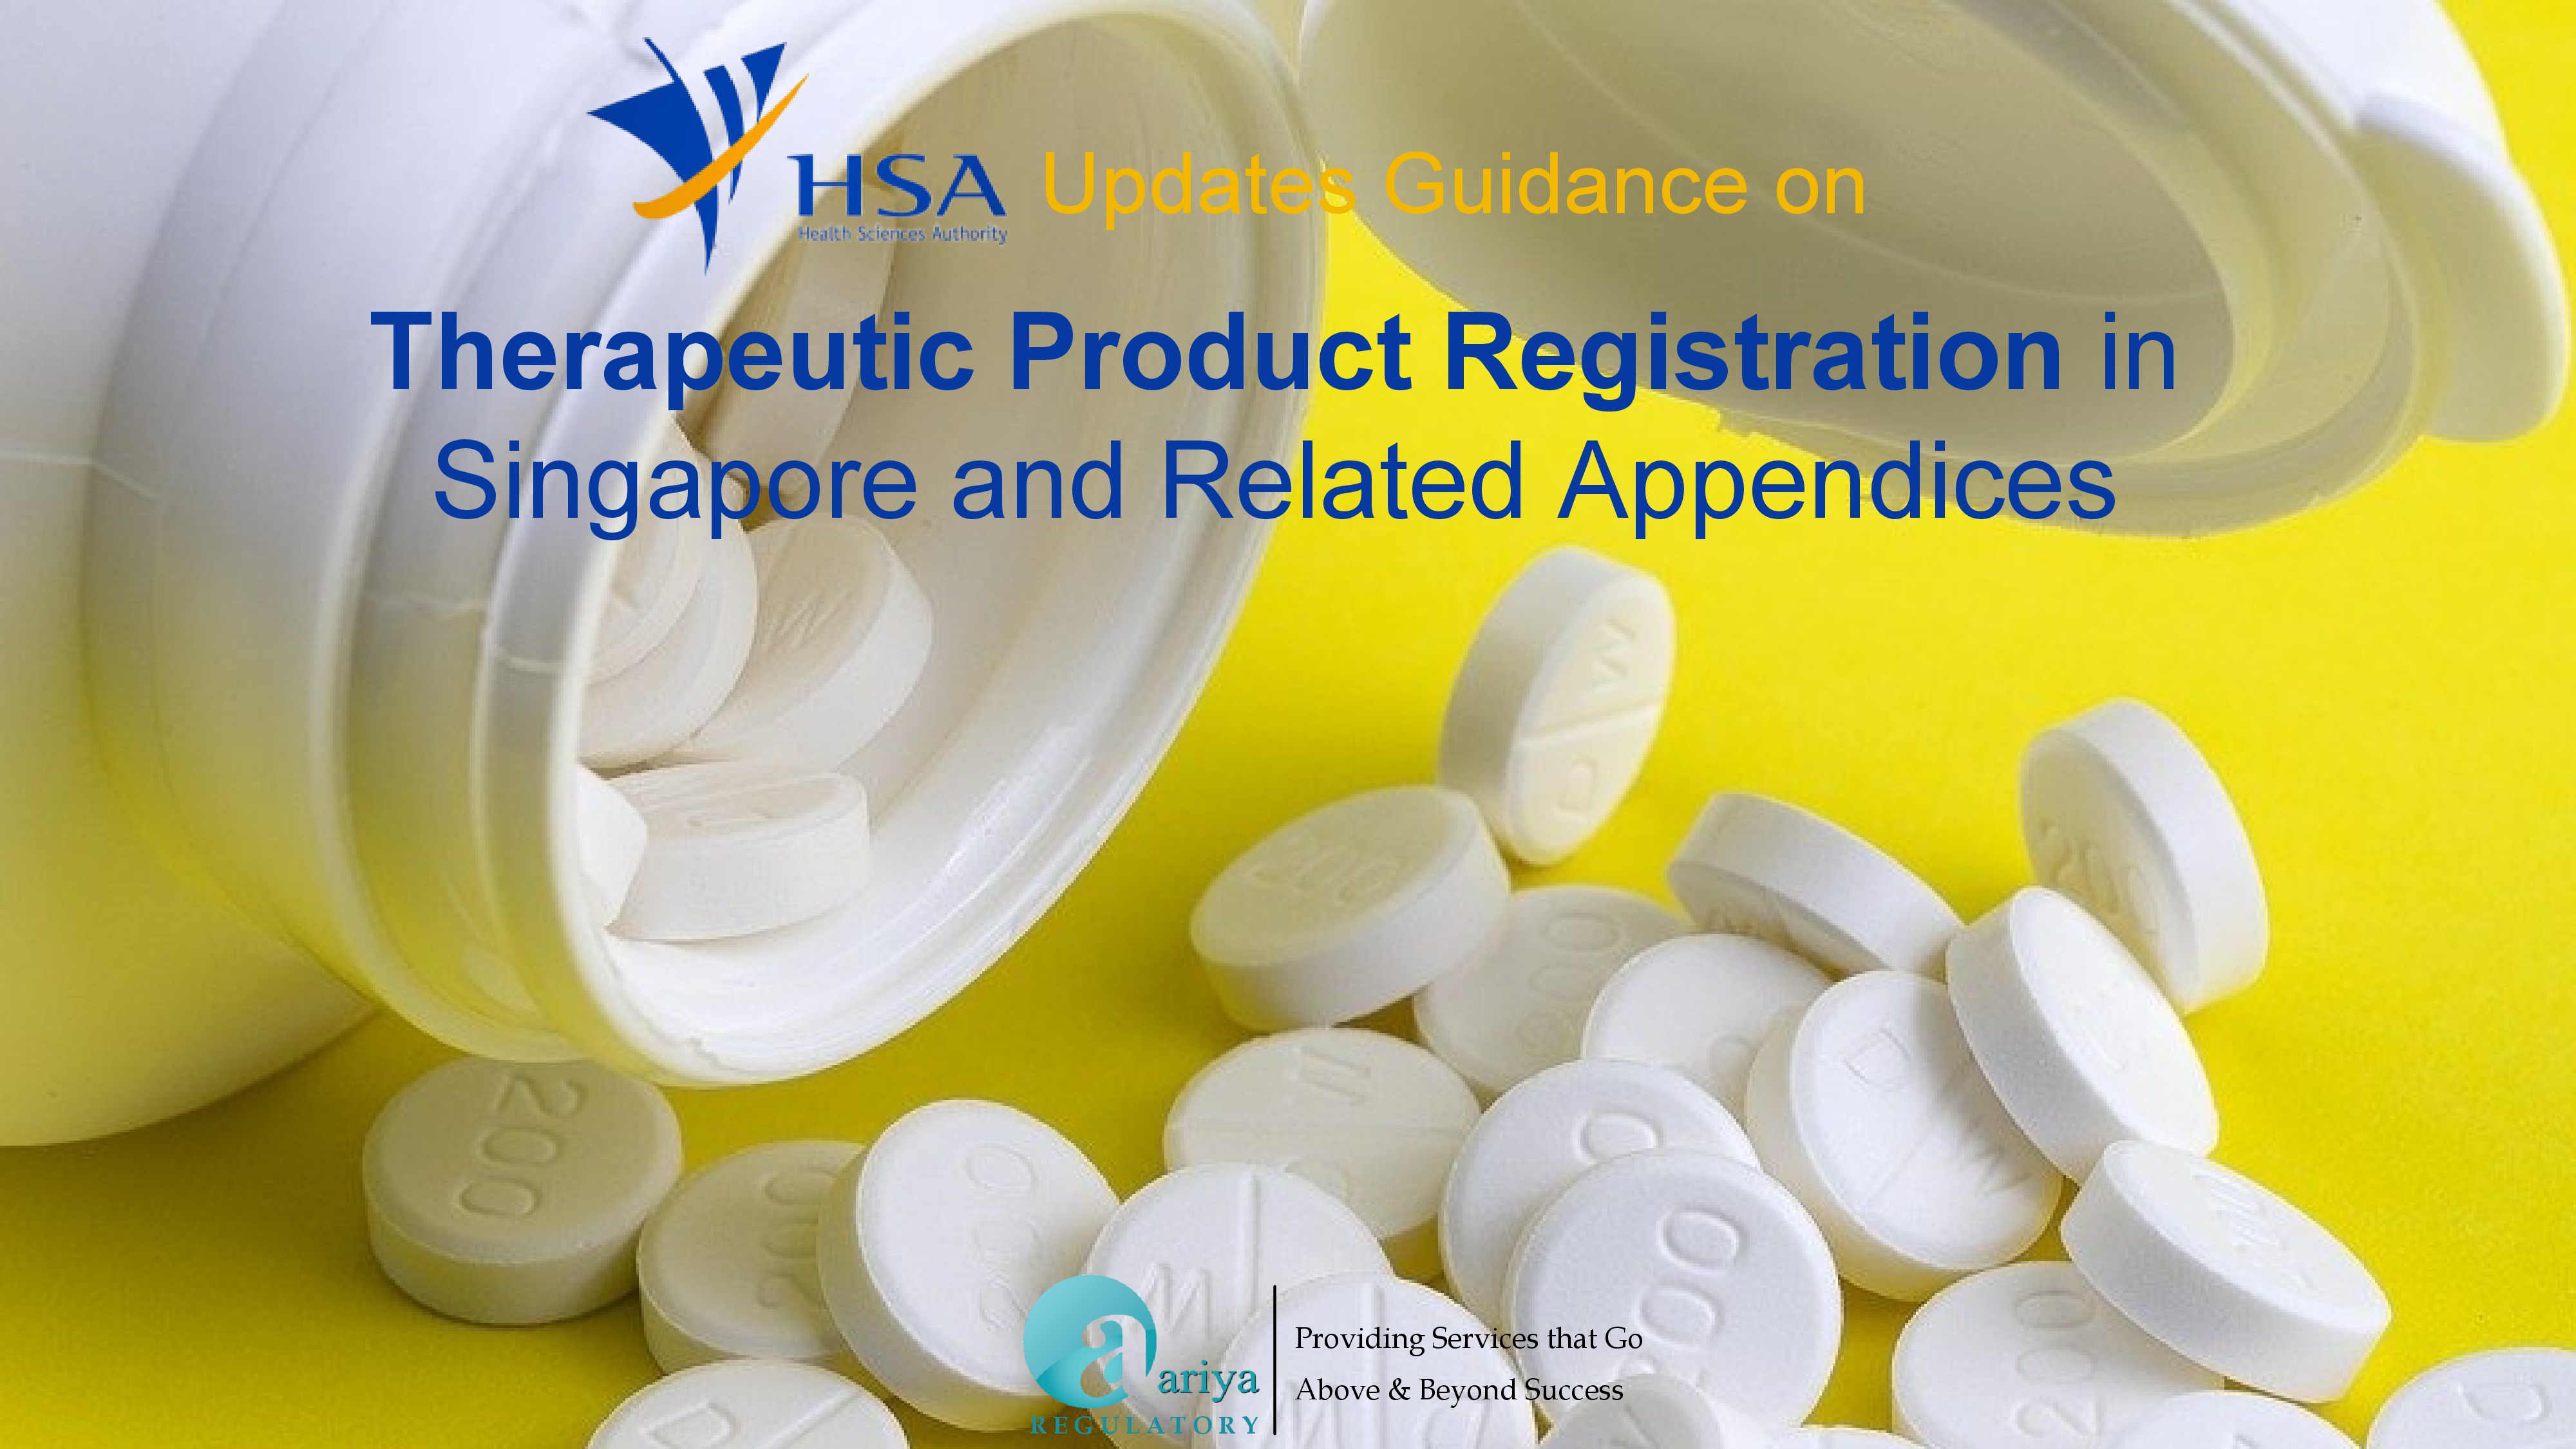 HSA, Singapore Updates Guidance on Therapeutic Product Registration and Related Appendices